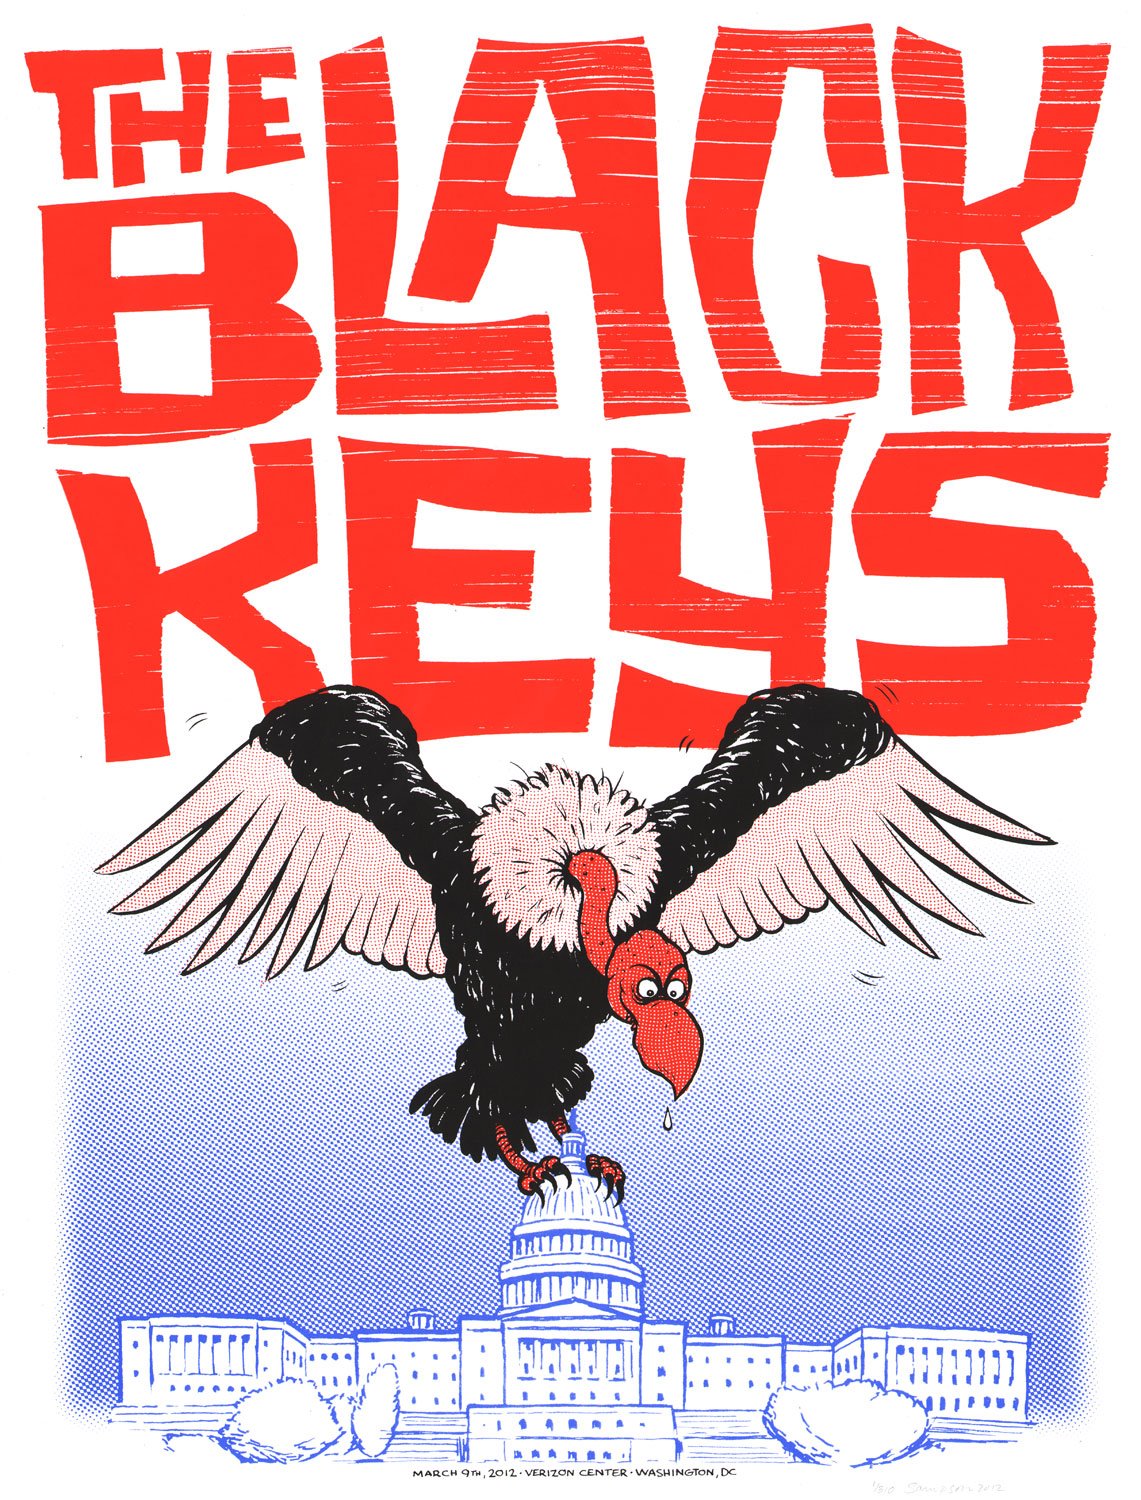 See 37 of The Black Keys’ tour posters from the year so far The Strut